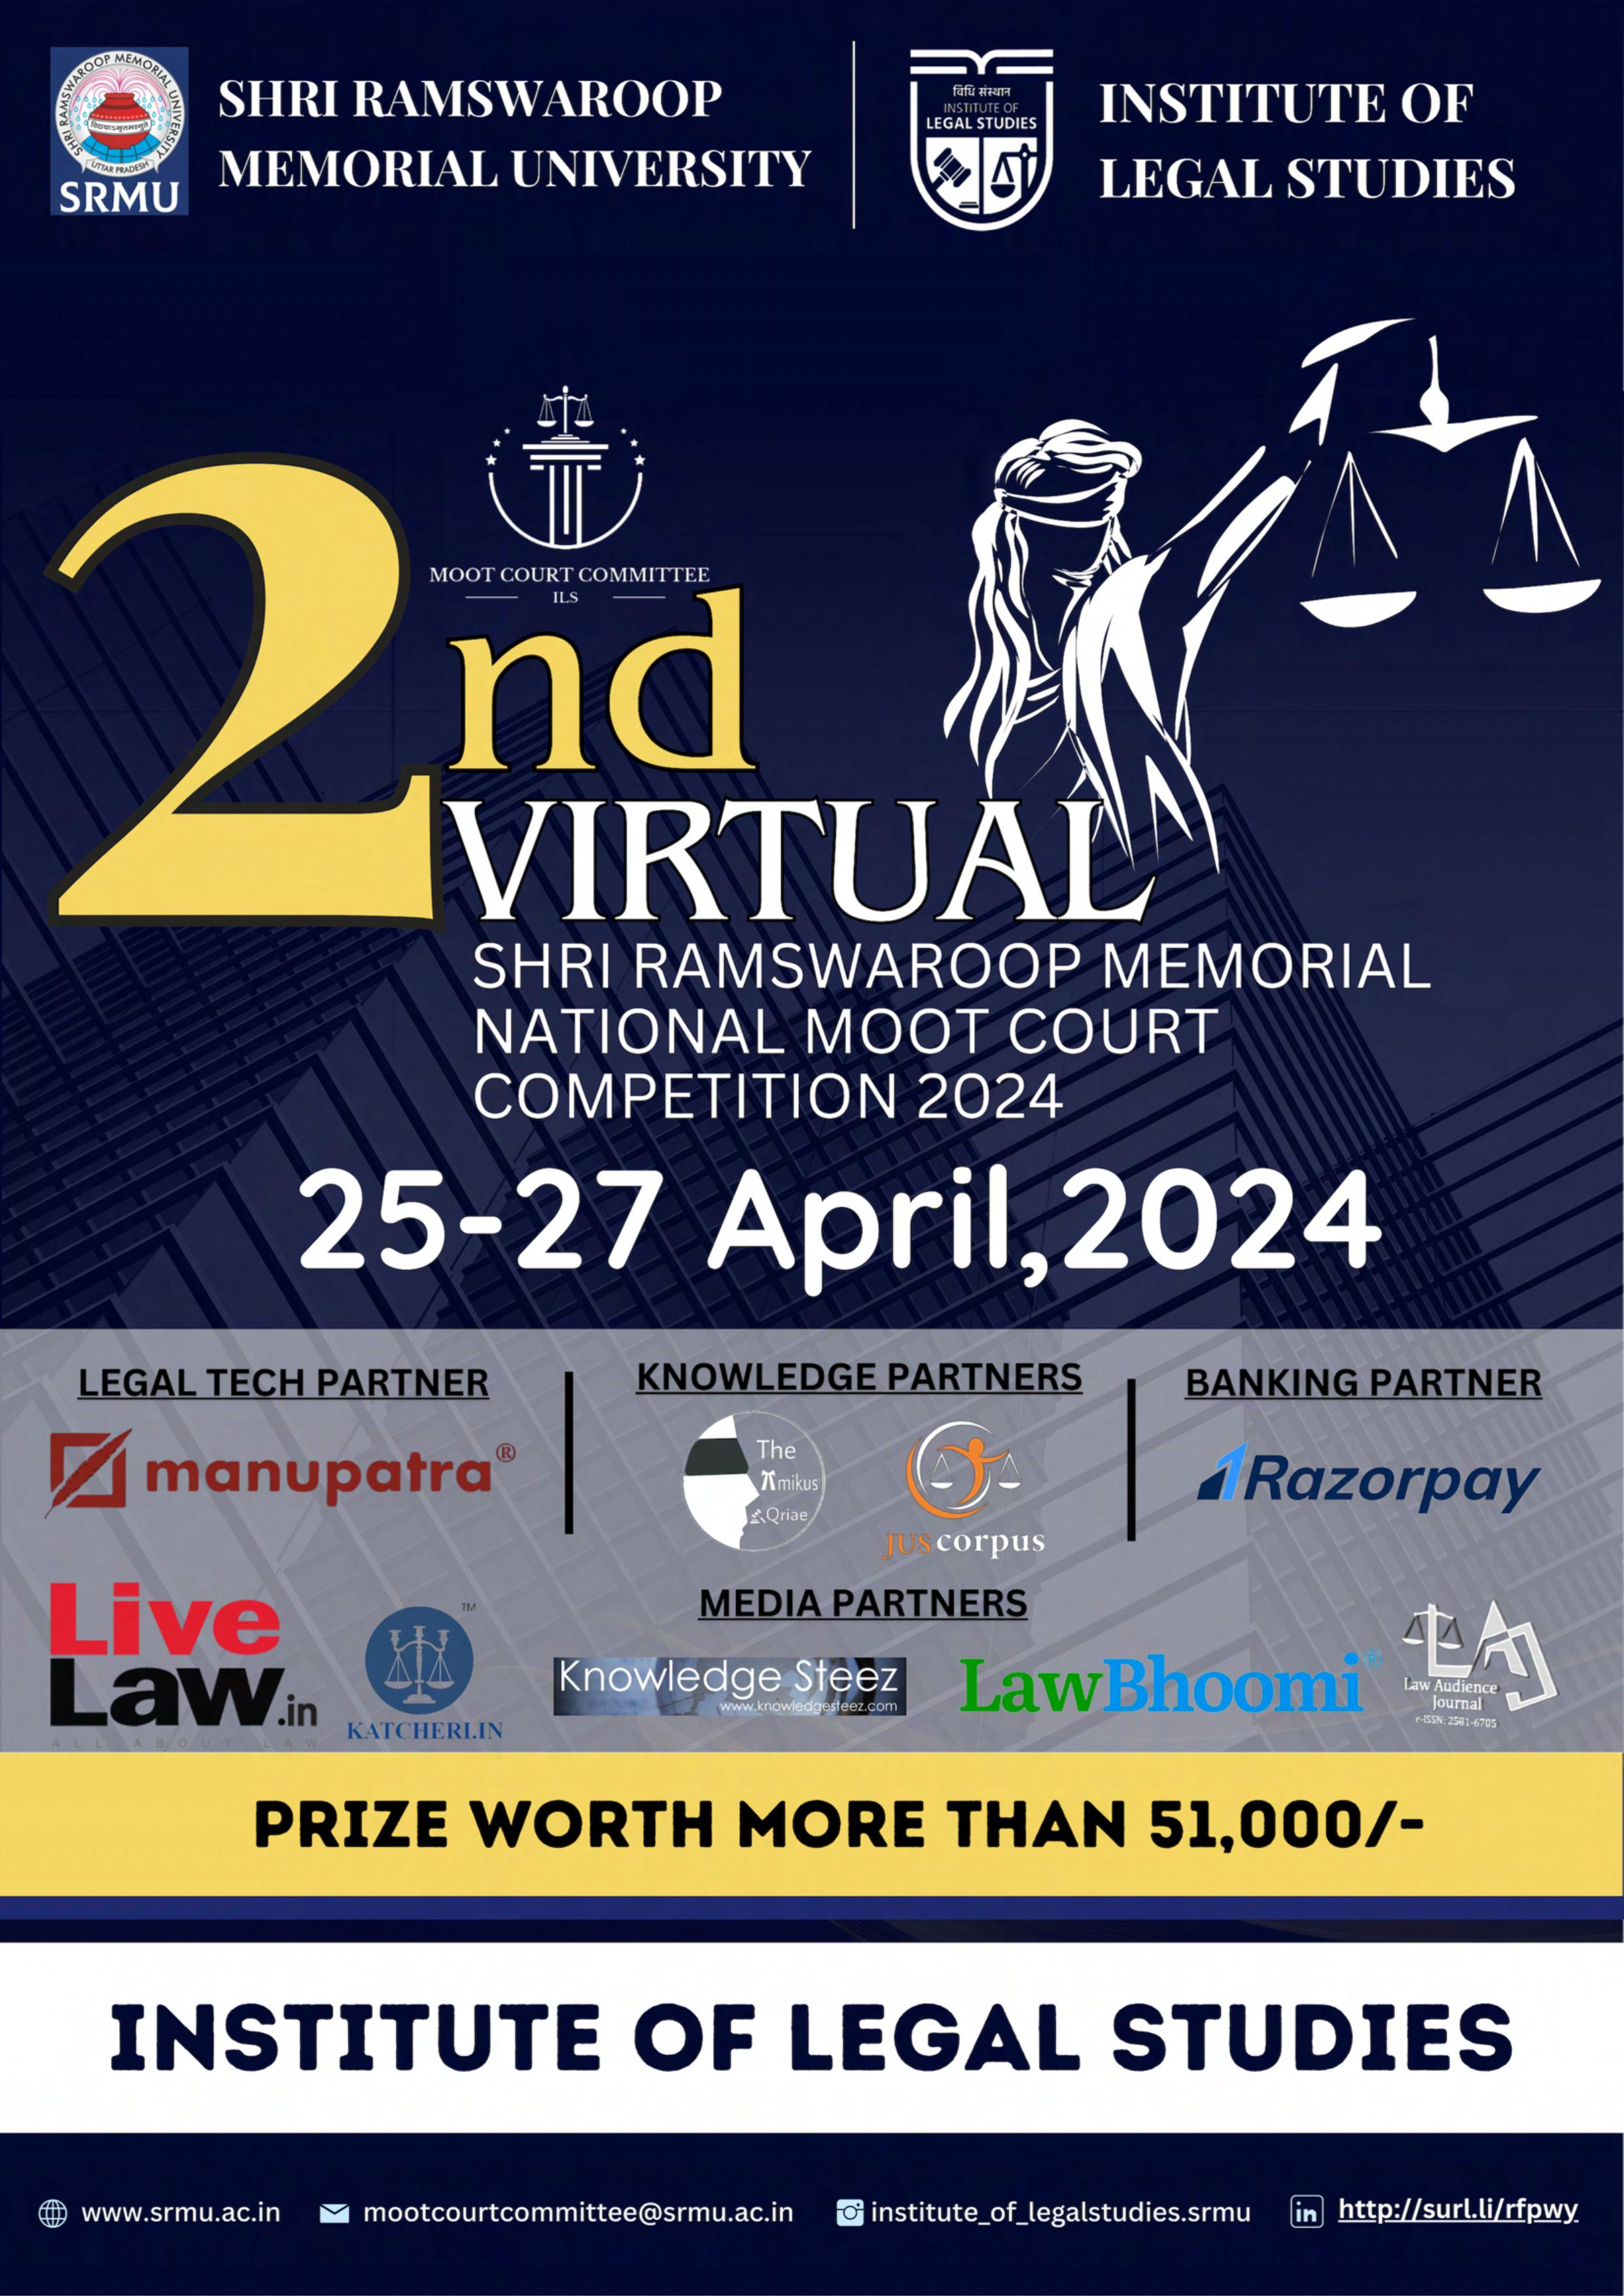 You are currently viewing 2nd Virtual Shri Ramswaroop Memorial National Moot Court Competition, 2024